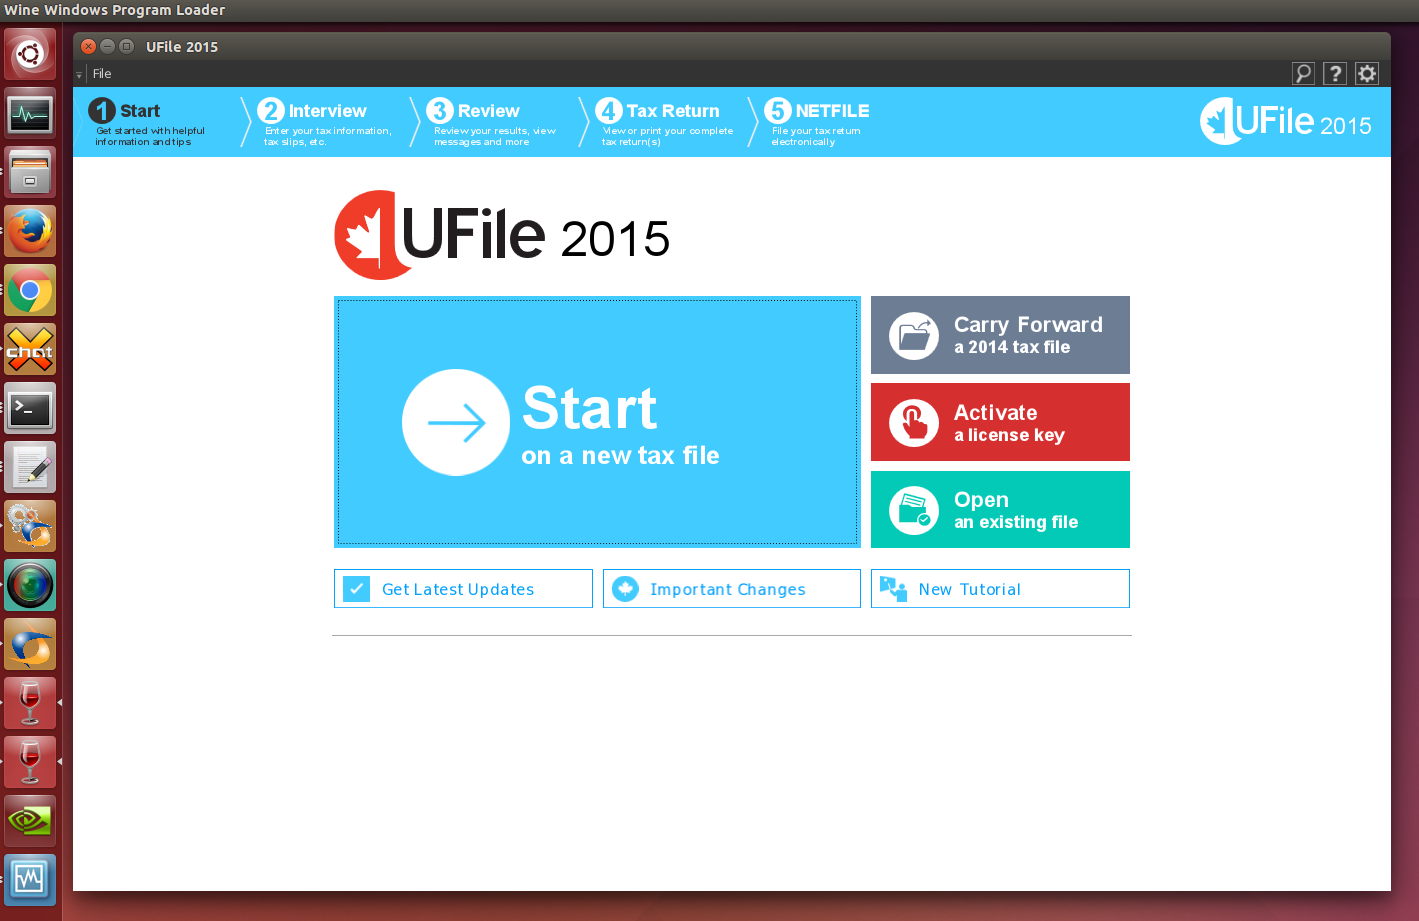 How do you use the UFile software for Canada taxes?